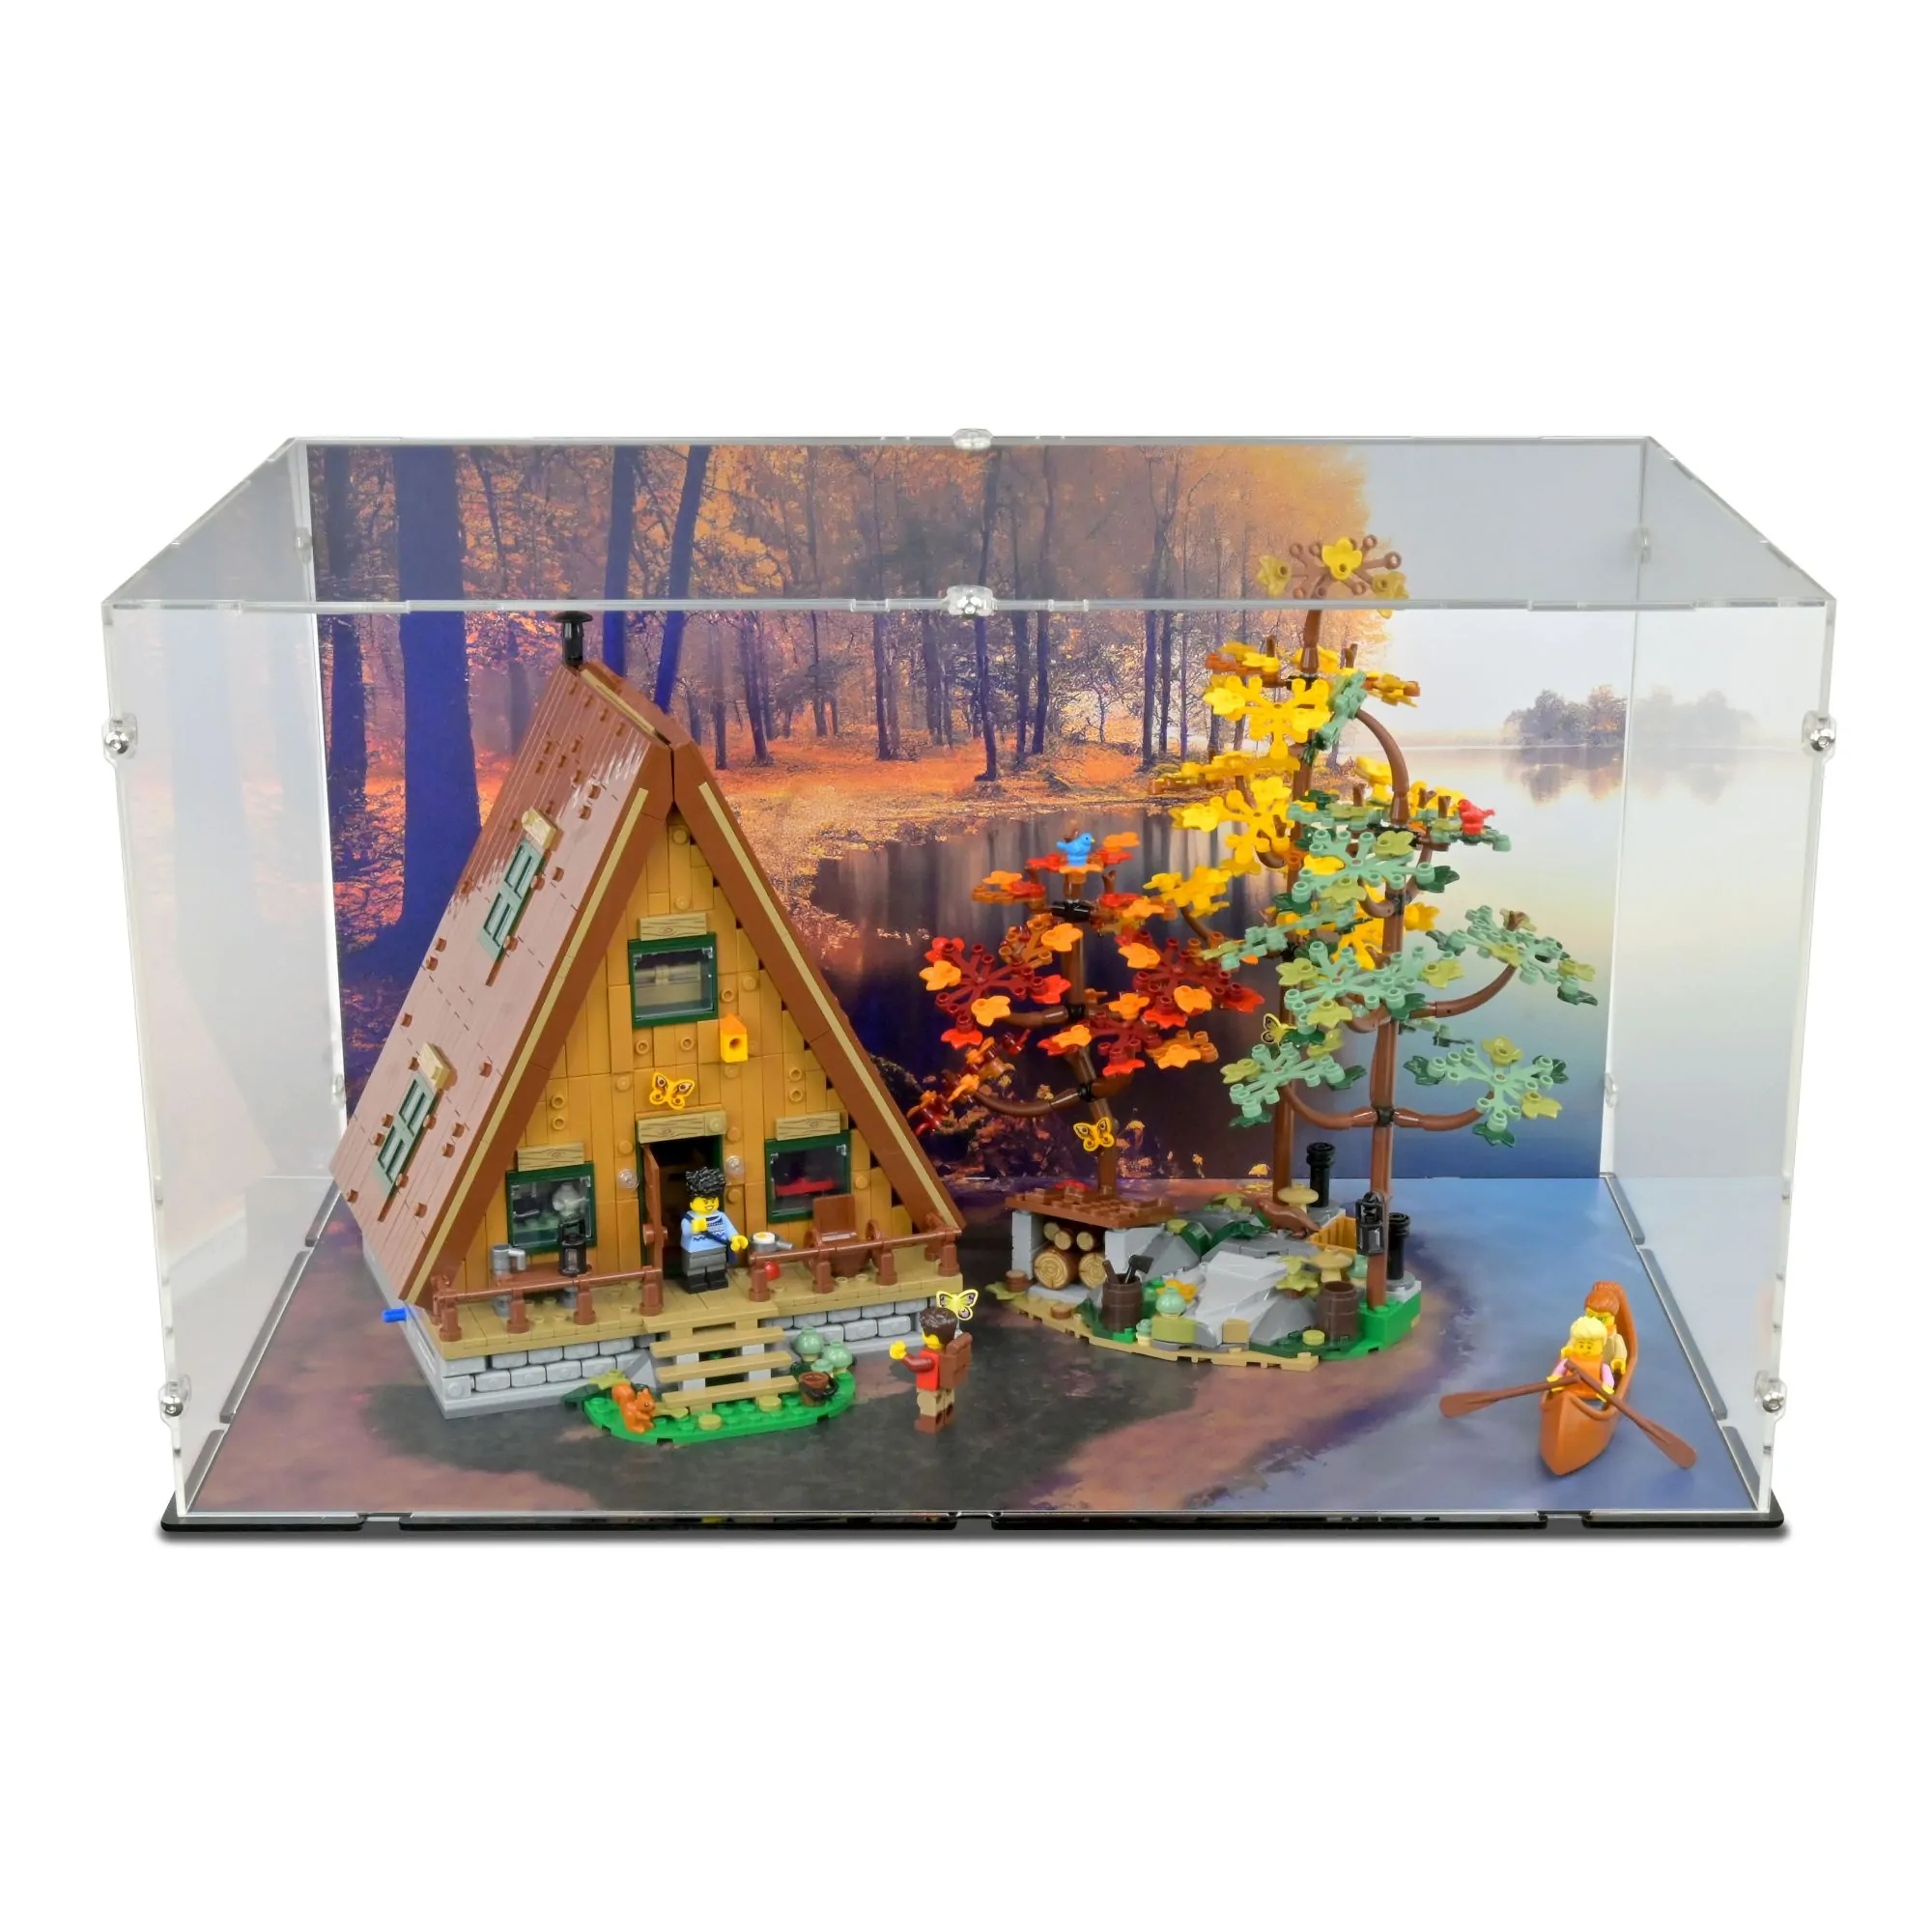 LEGO Ideas A-Frame Cabin 21338 Collectible Model Kit for Adults to Build